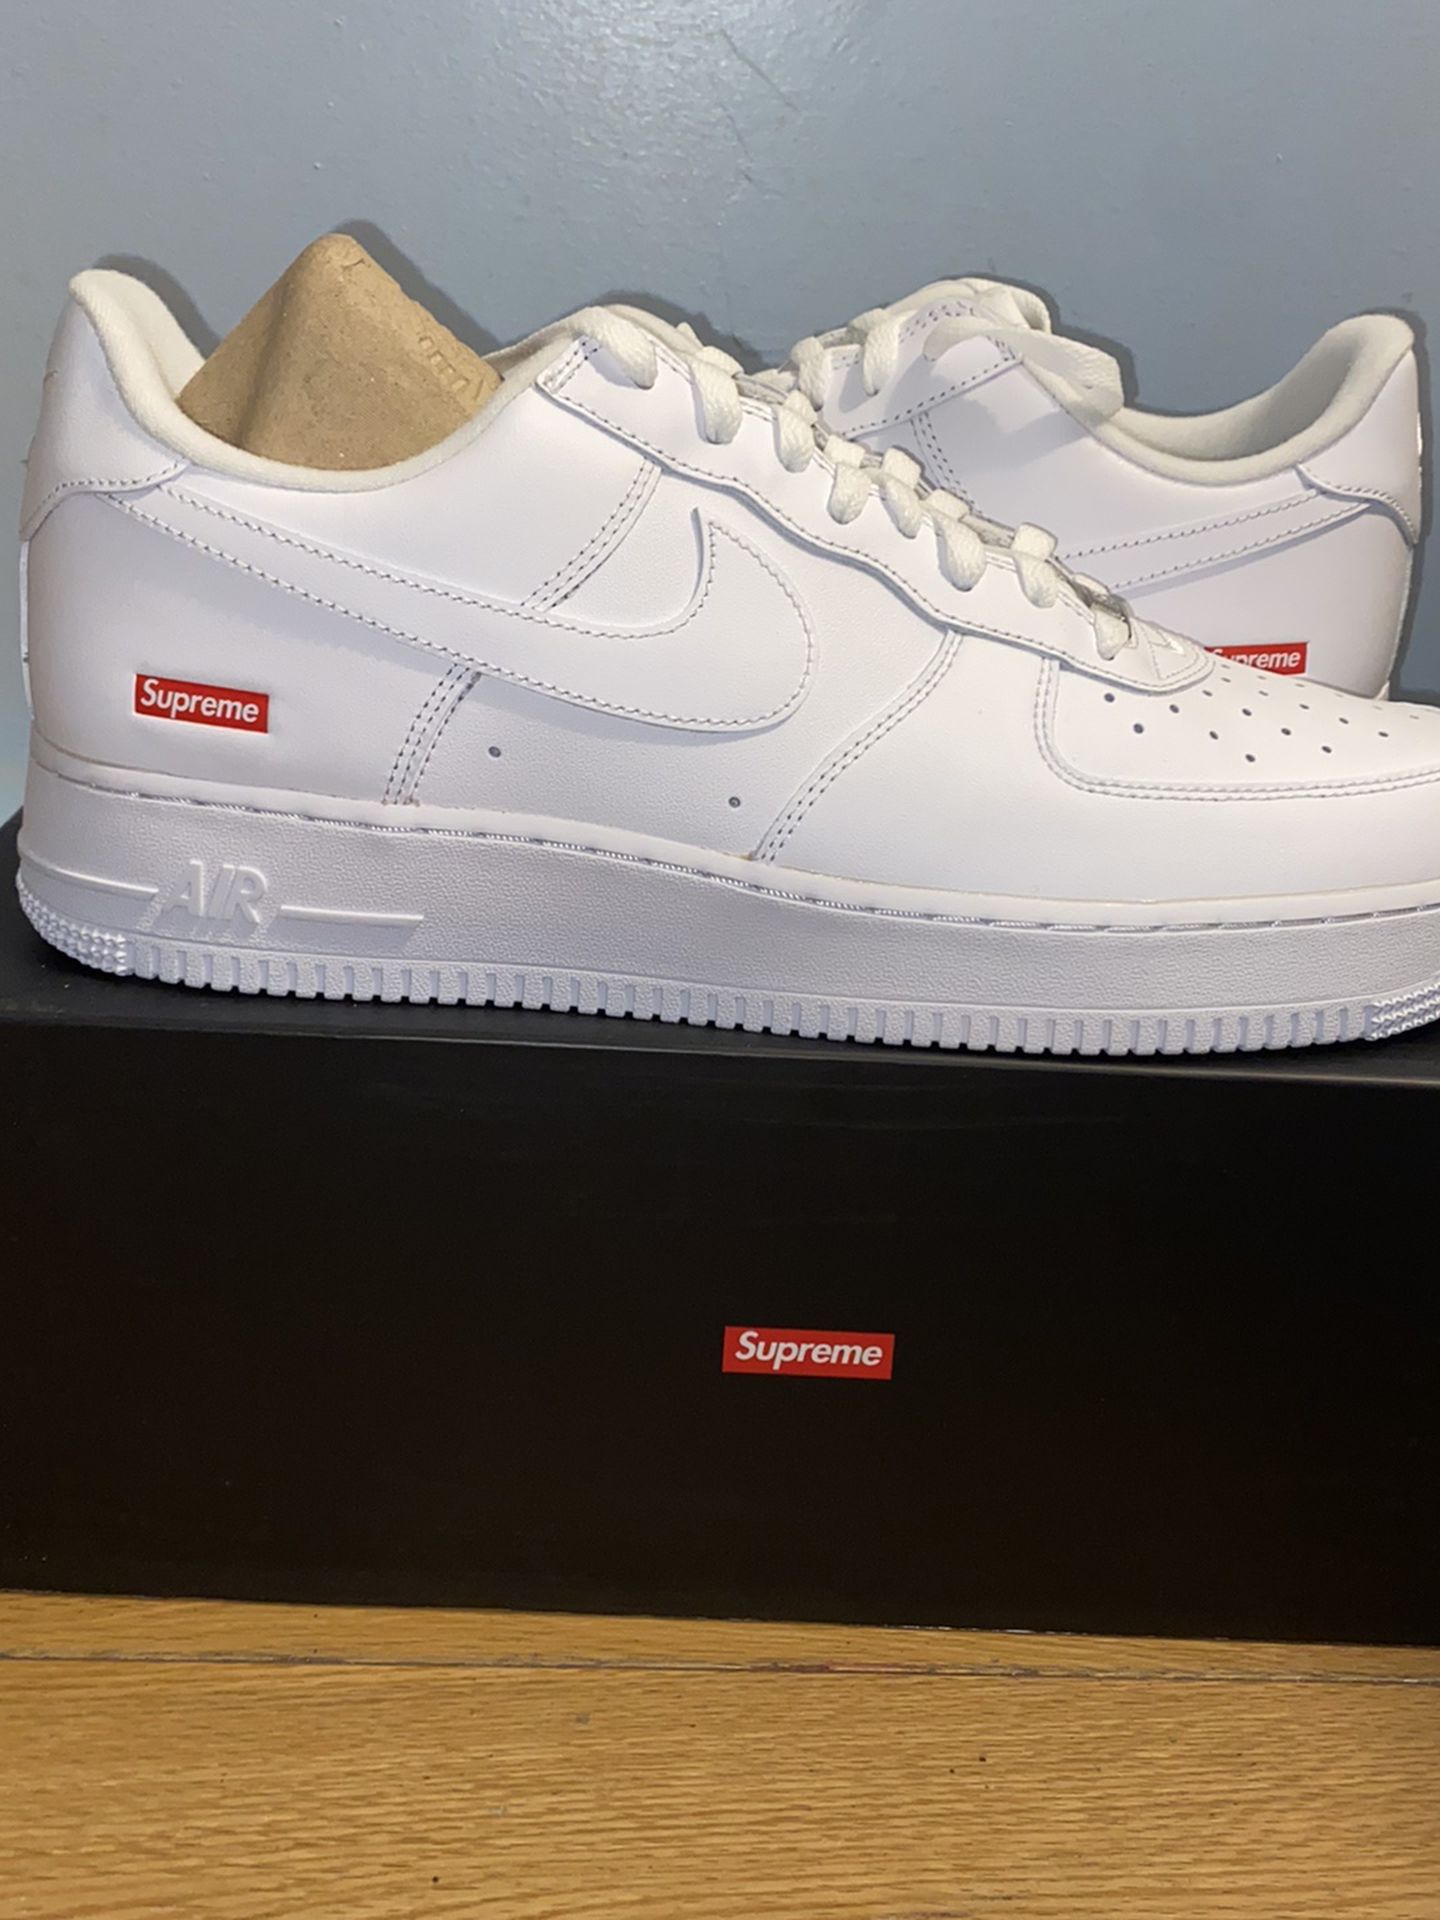 Supreme Air Force 1 2x Size 11.5